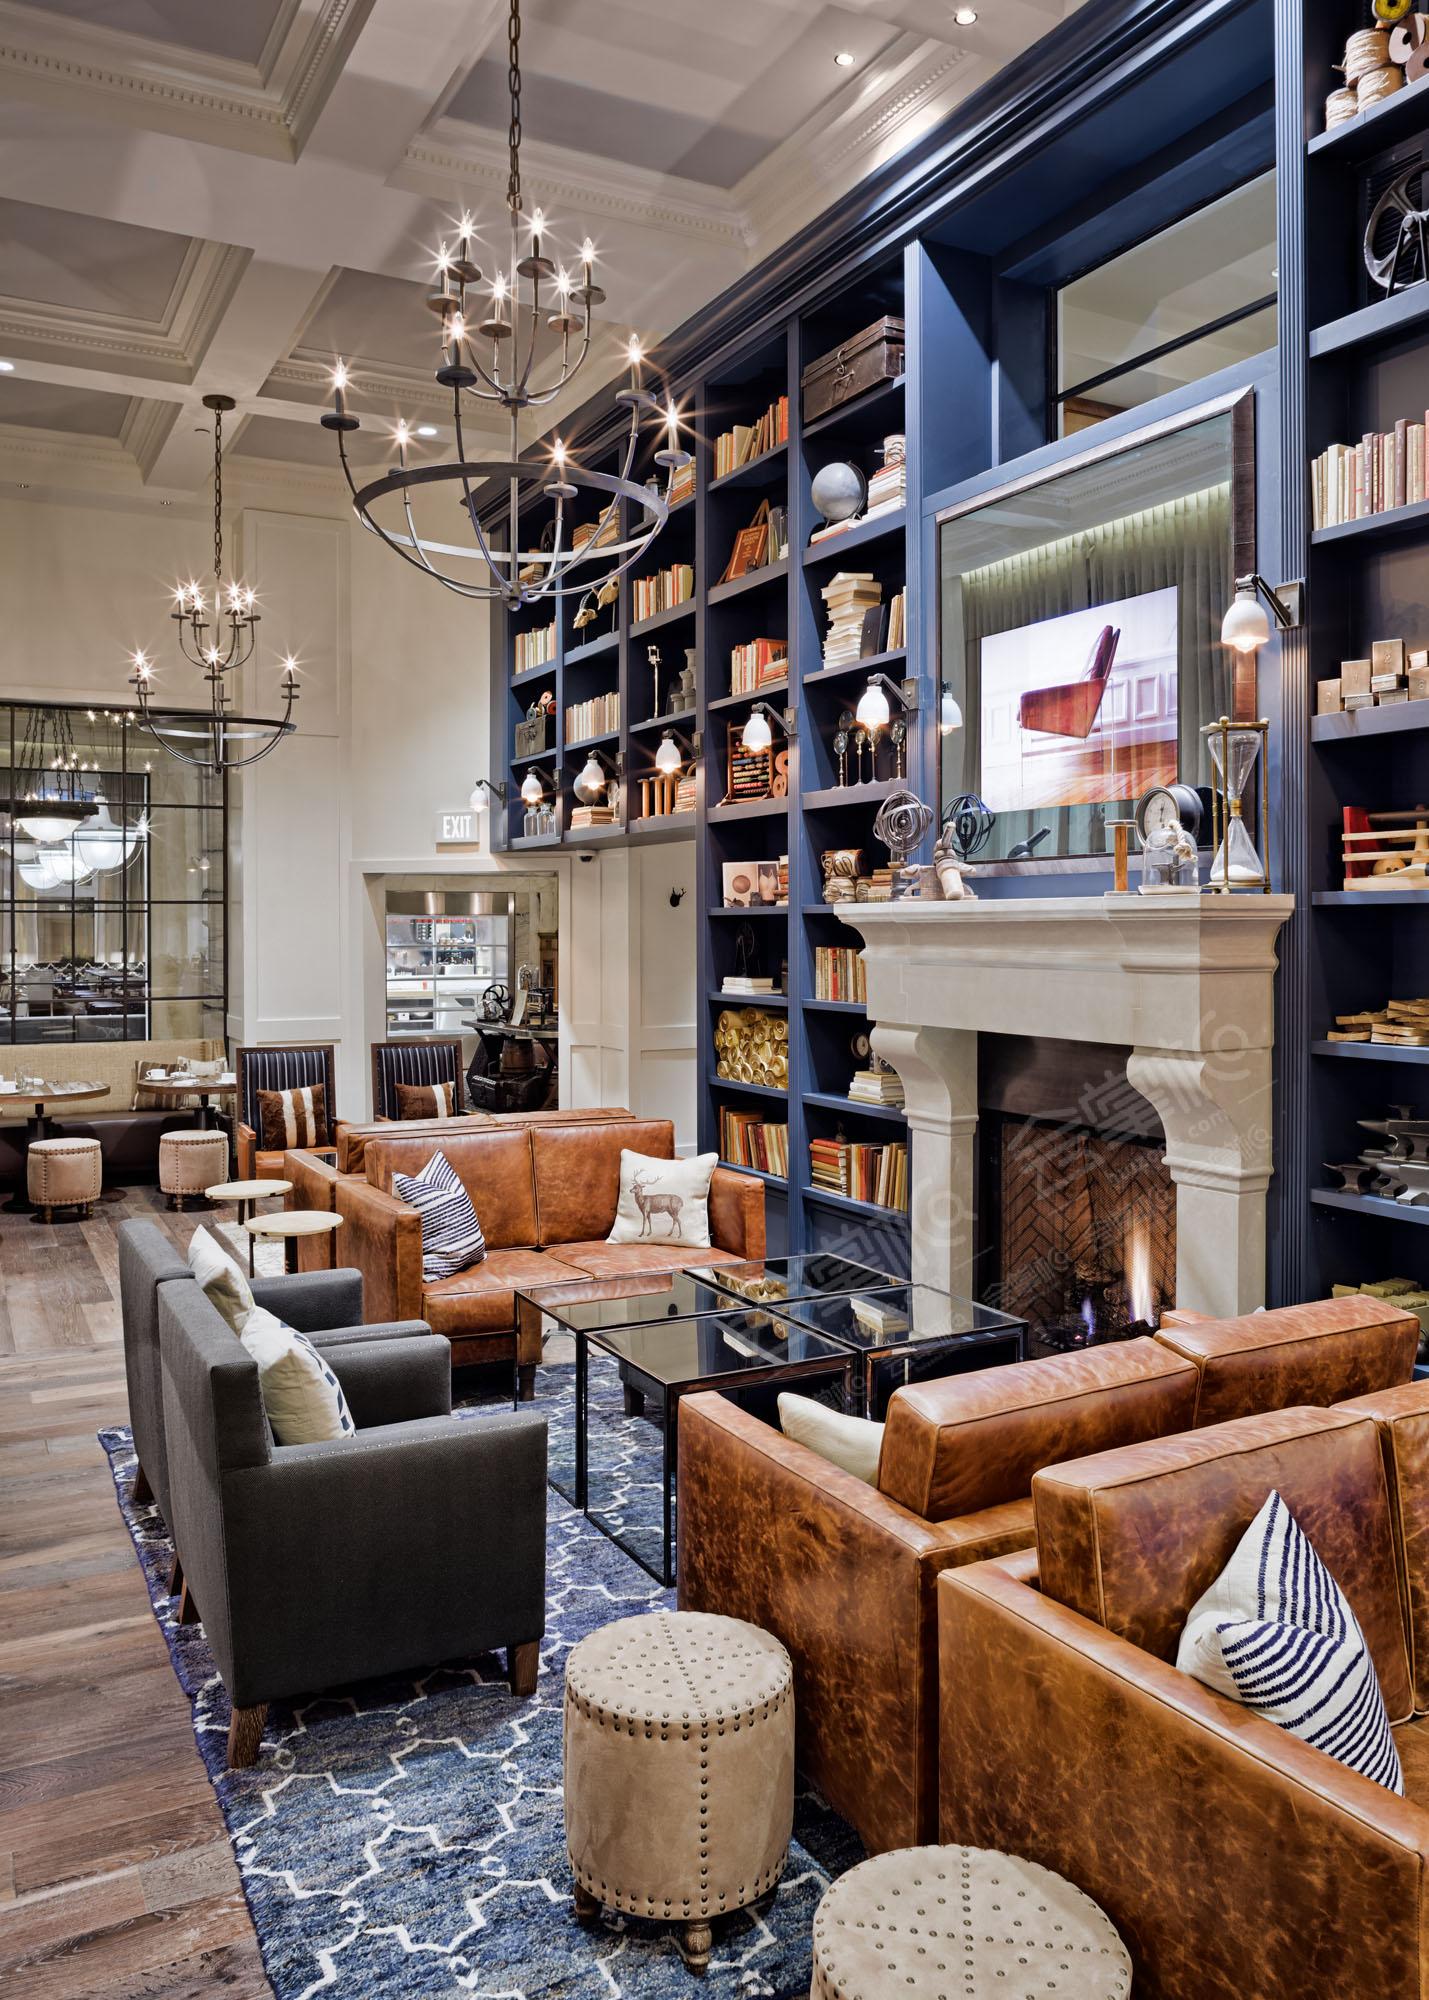 Rustic Downtown Denver Hotel Study